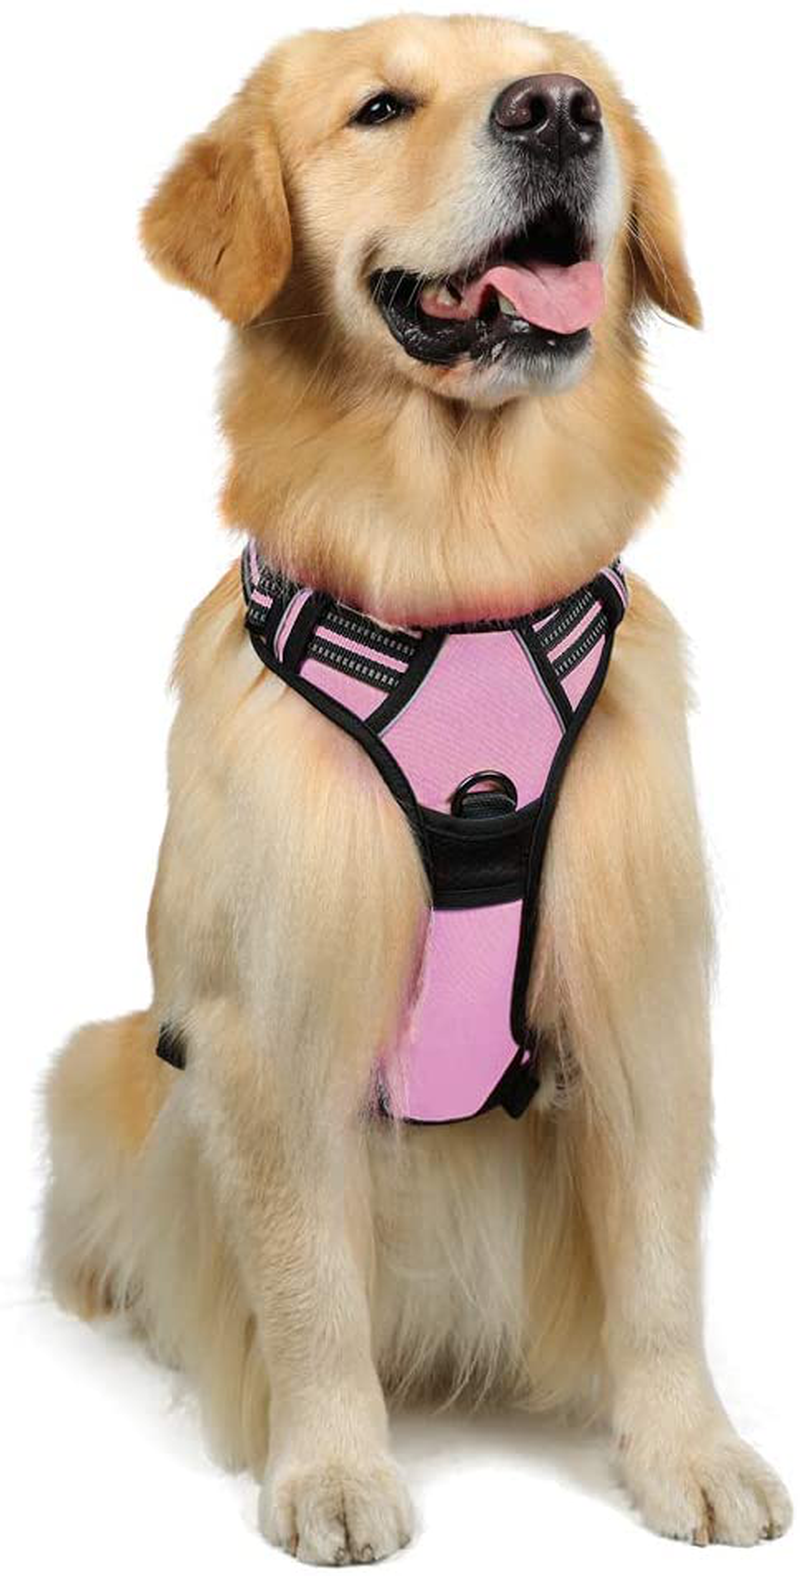 rabbitgoo Dog Harness, No-Pull Pet Harness with 2 Leash Clips, Adjustable Soft Padded Dog Vest, Reflective No-Choke Pet Oxford Vest with Easy Control Handle for Large Dogs, Black, XL  rabbitgoo Cherry Pink Large 